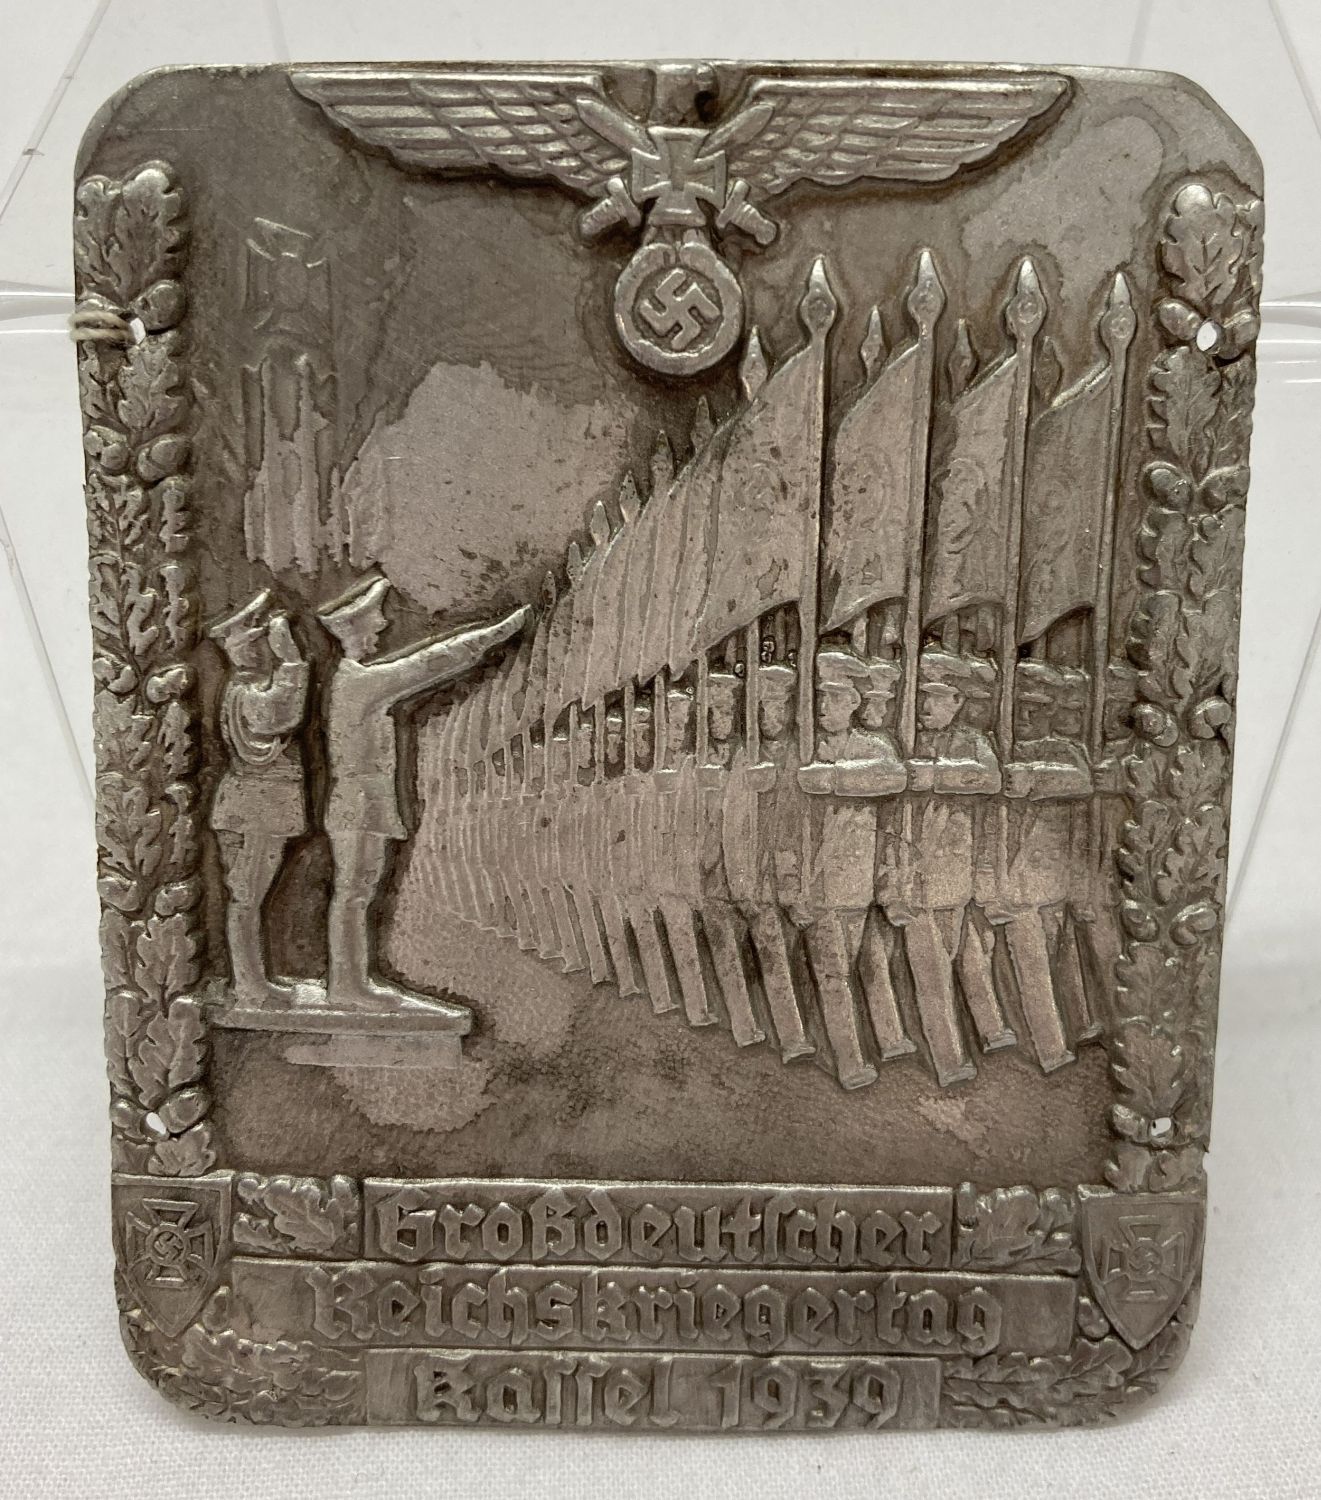 A WWII style German Army Veterans Plaque for attending a march in Kassel.